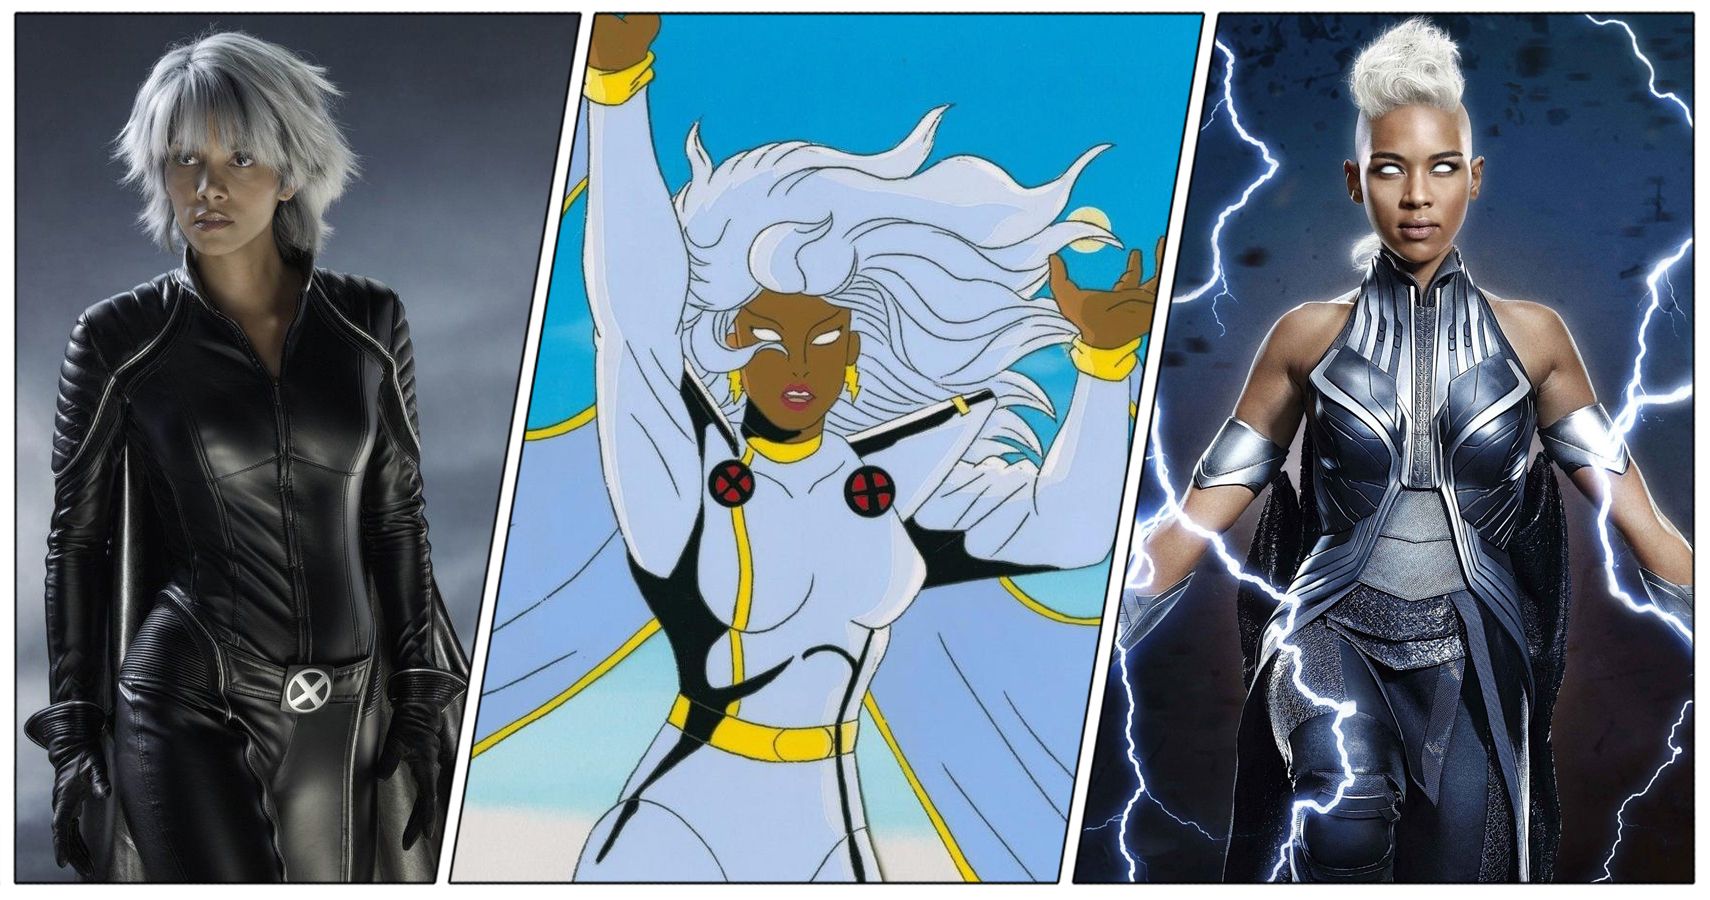 devin white share pictures of storm from xmen photos